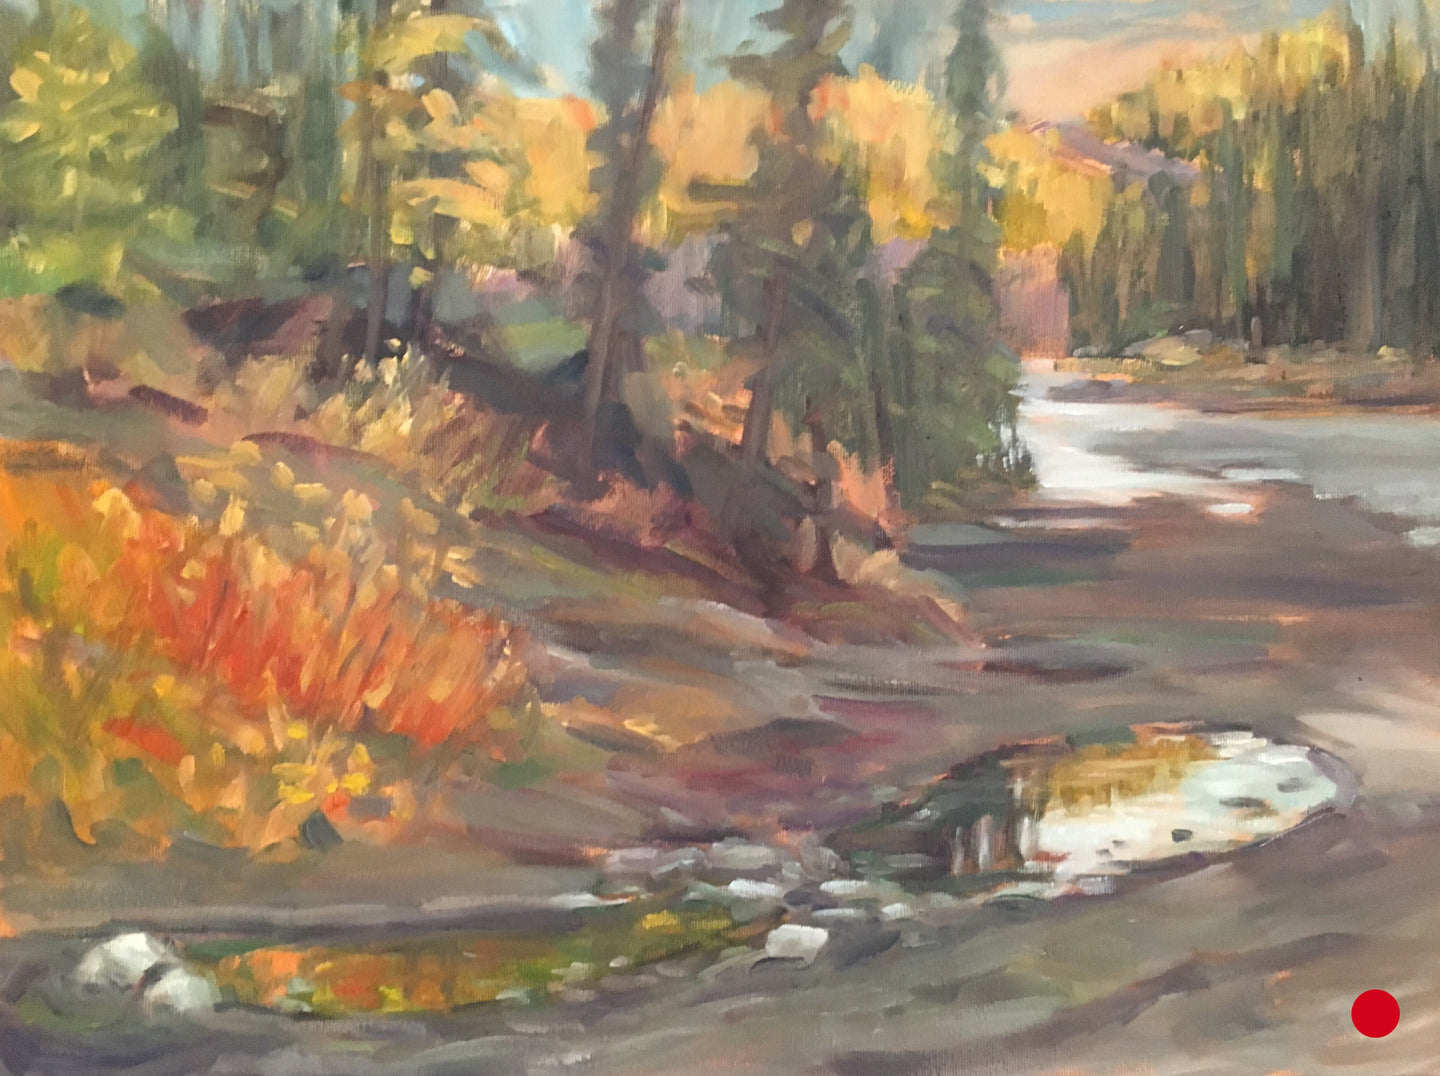 Elbow River Puddles, 12 x 16